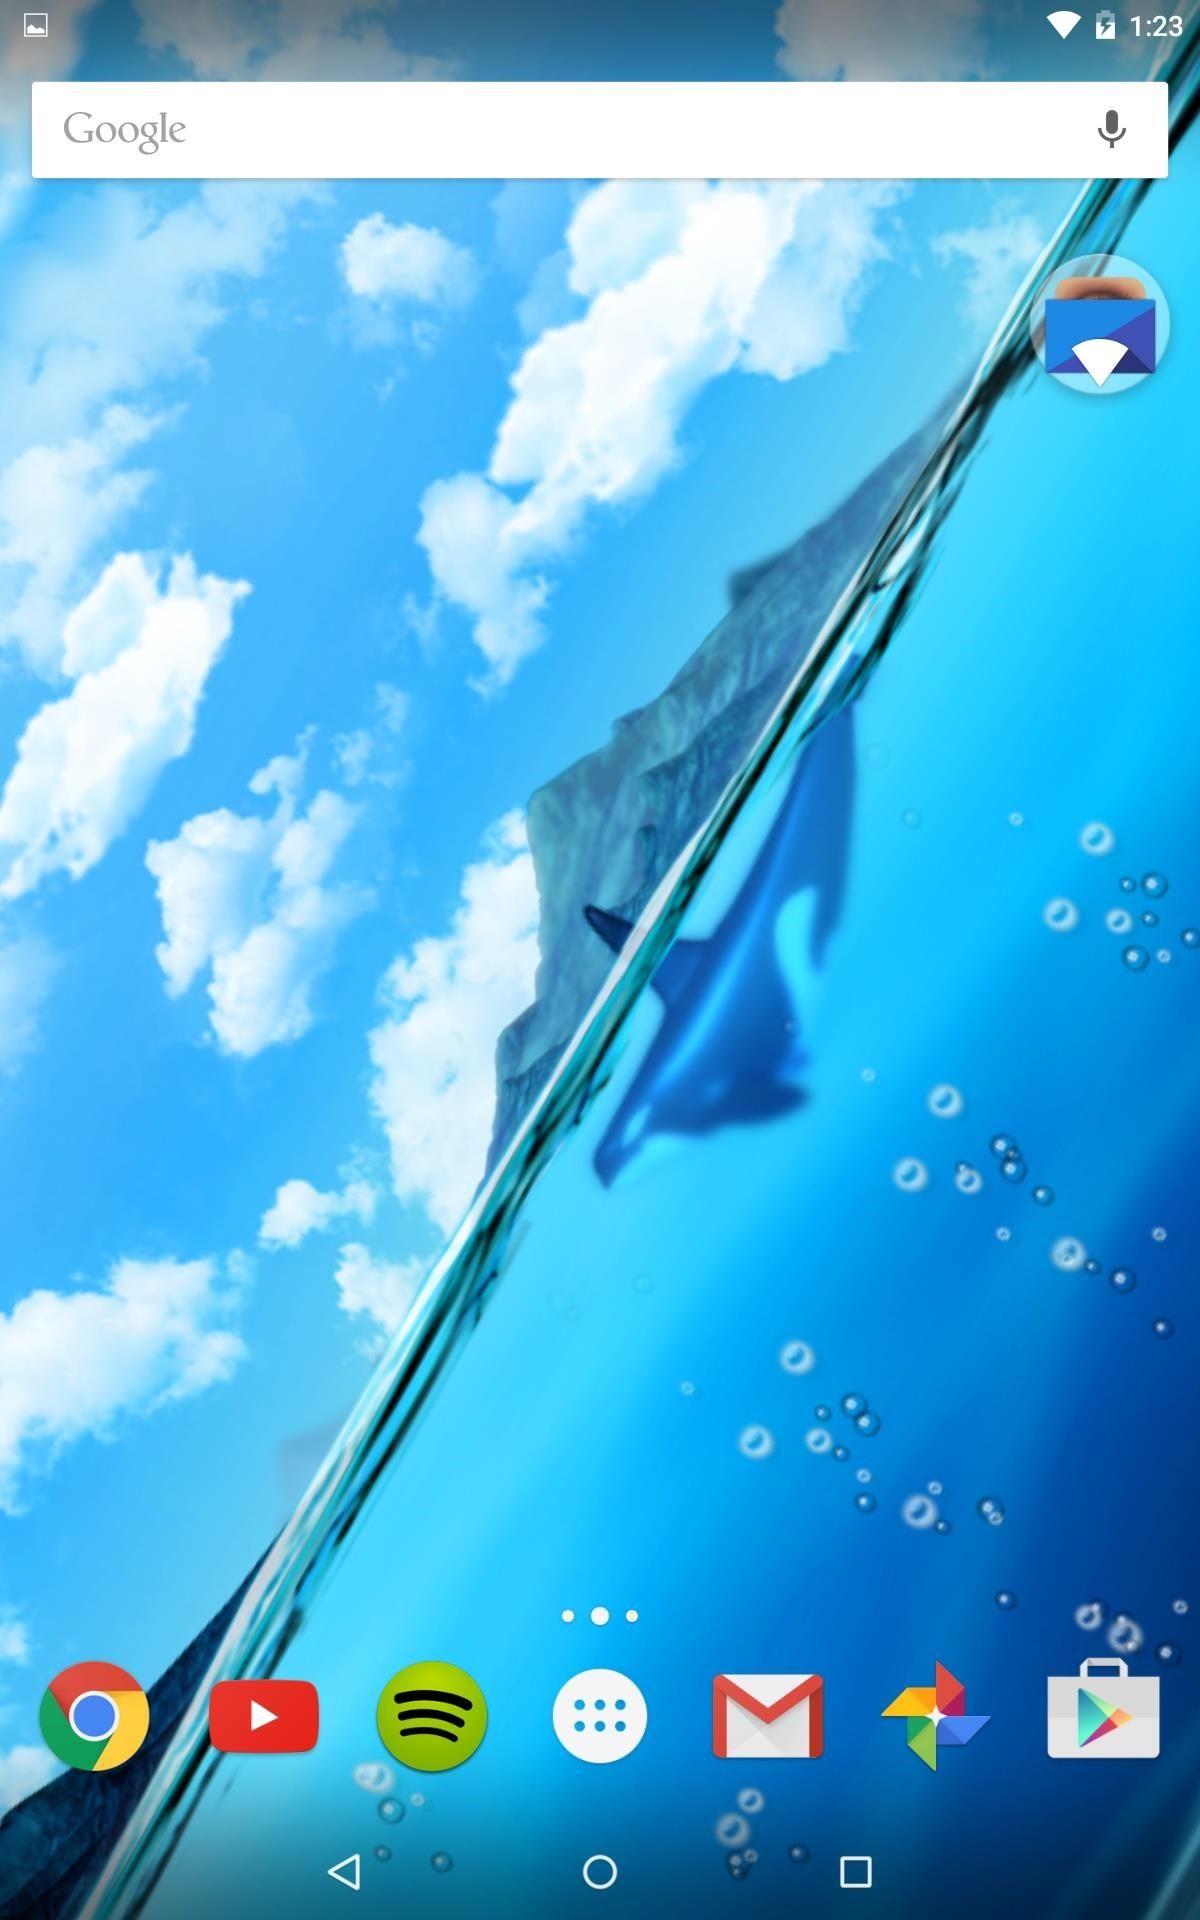 This Live Wallpaper Uses Ocean Water Levels to Display Your Android's Battery Life